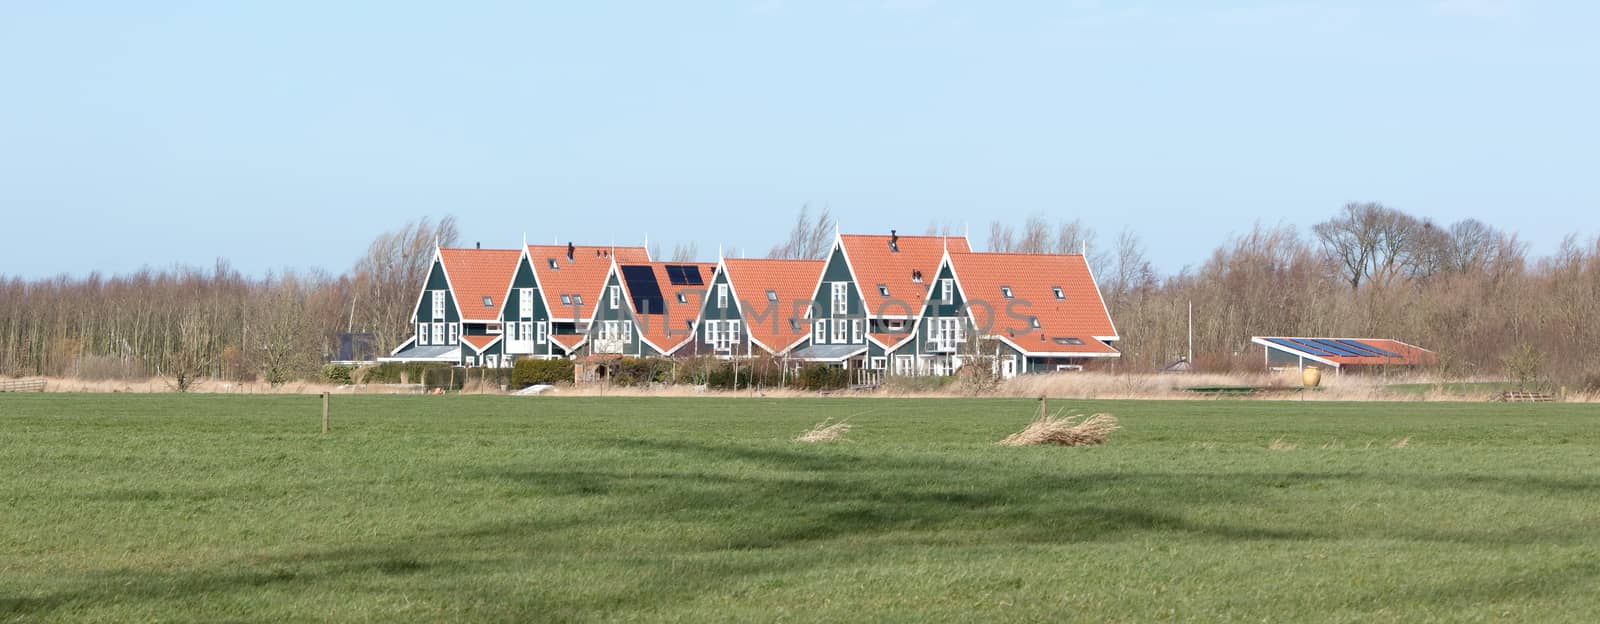 Six old houses in the Netherlands, typical dutch landscape